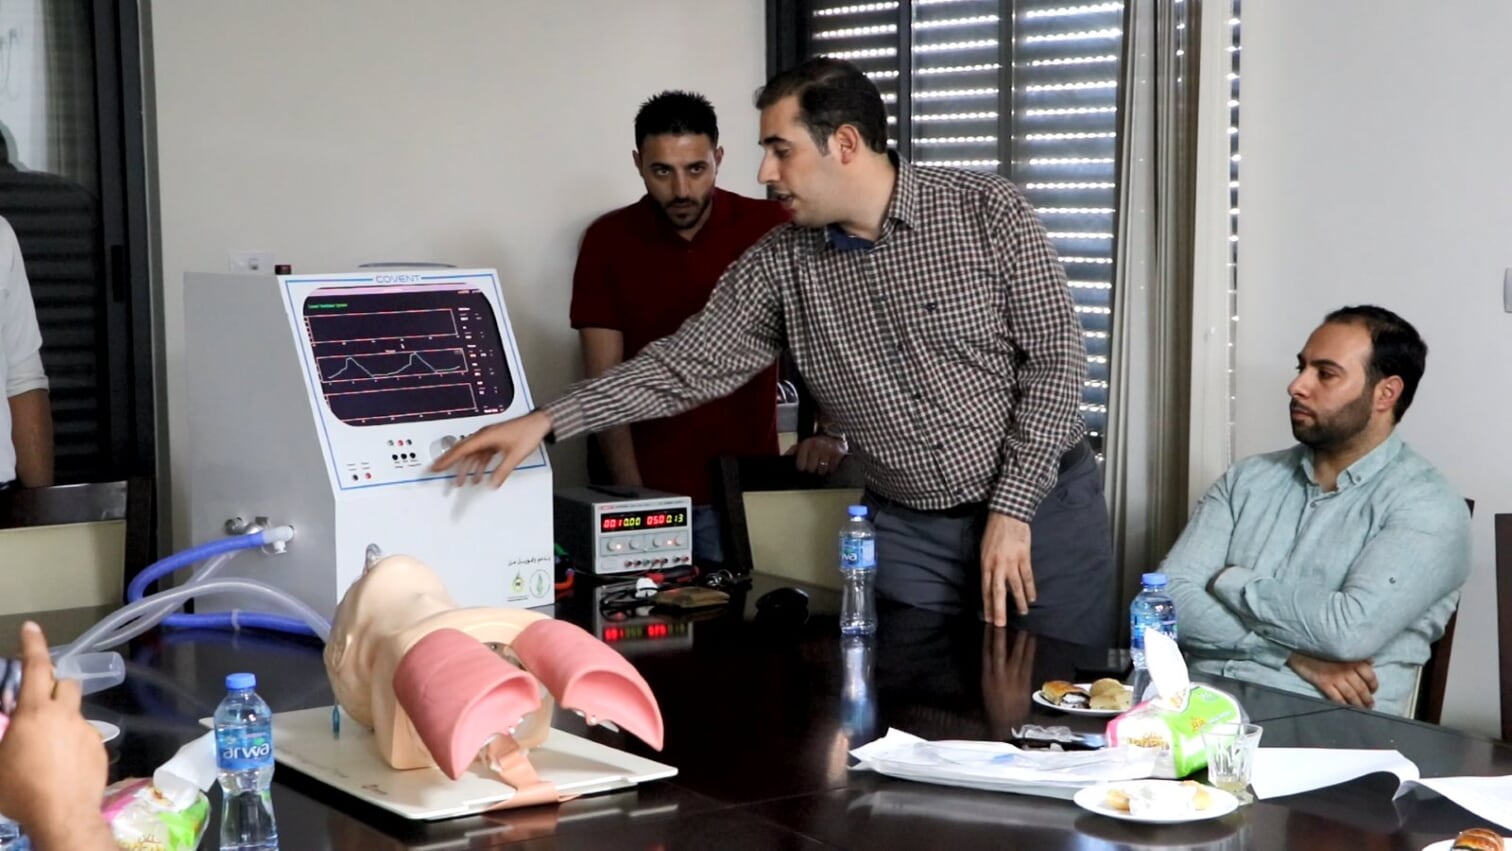 AAUP Contributes in Supporting the Project of " COVENT Ventilator " the first of its Kind in Palestine